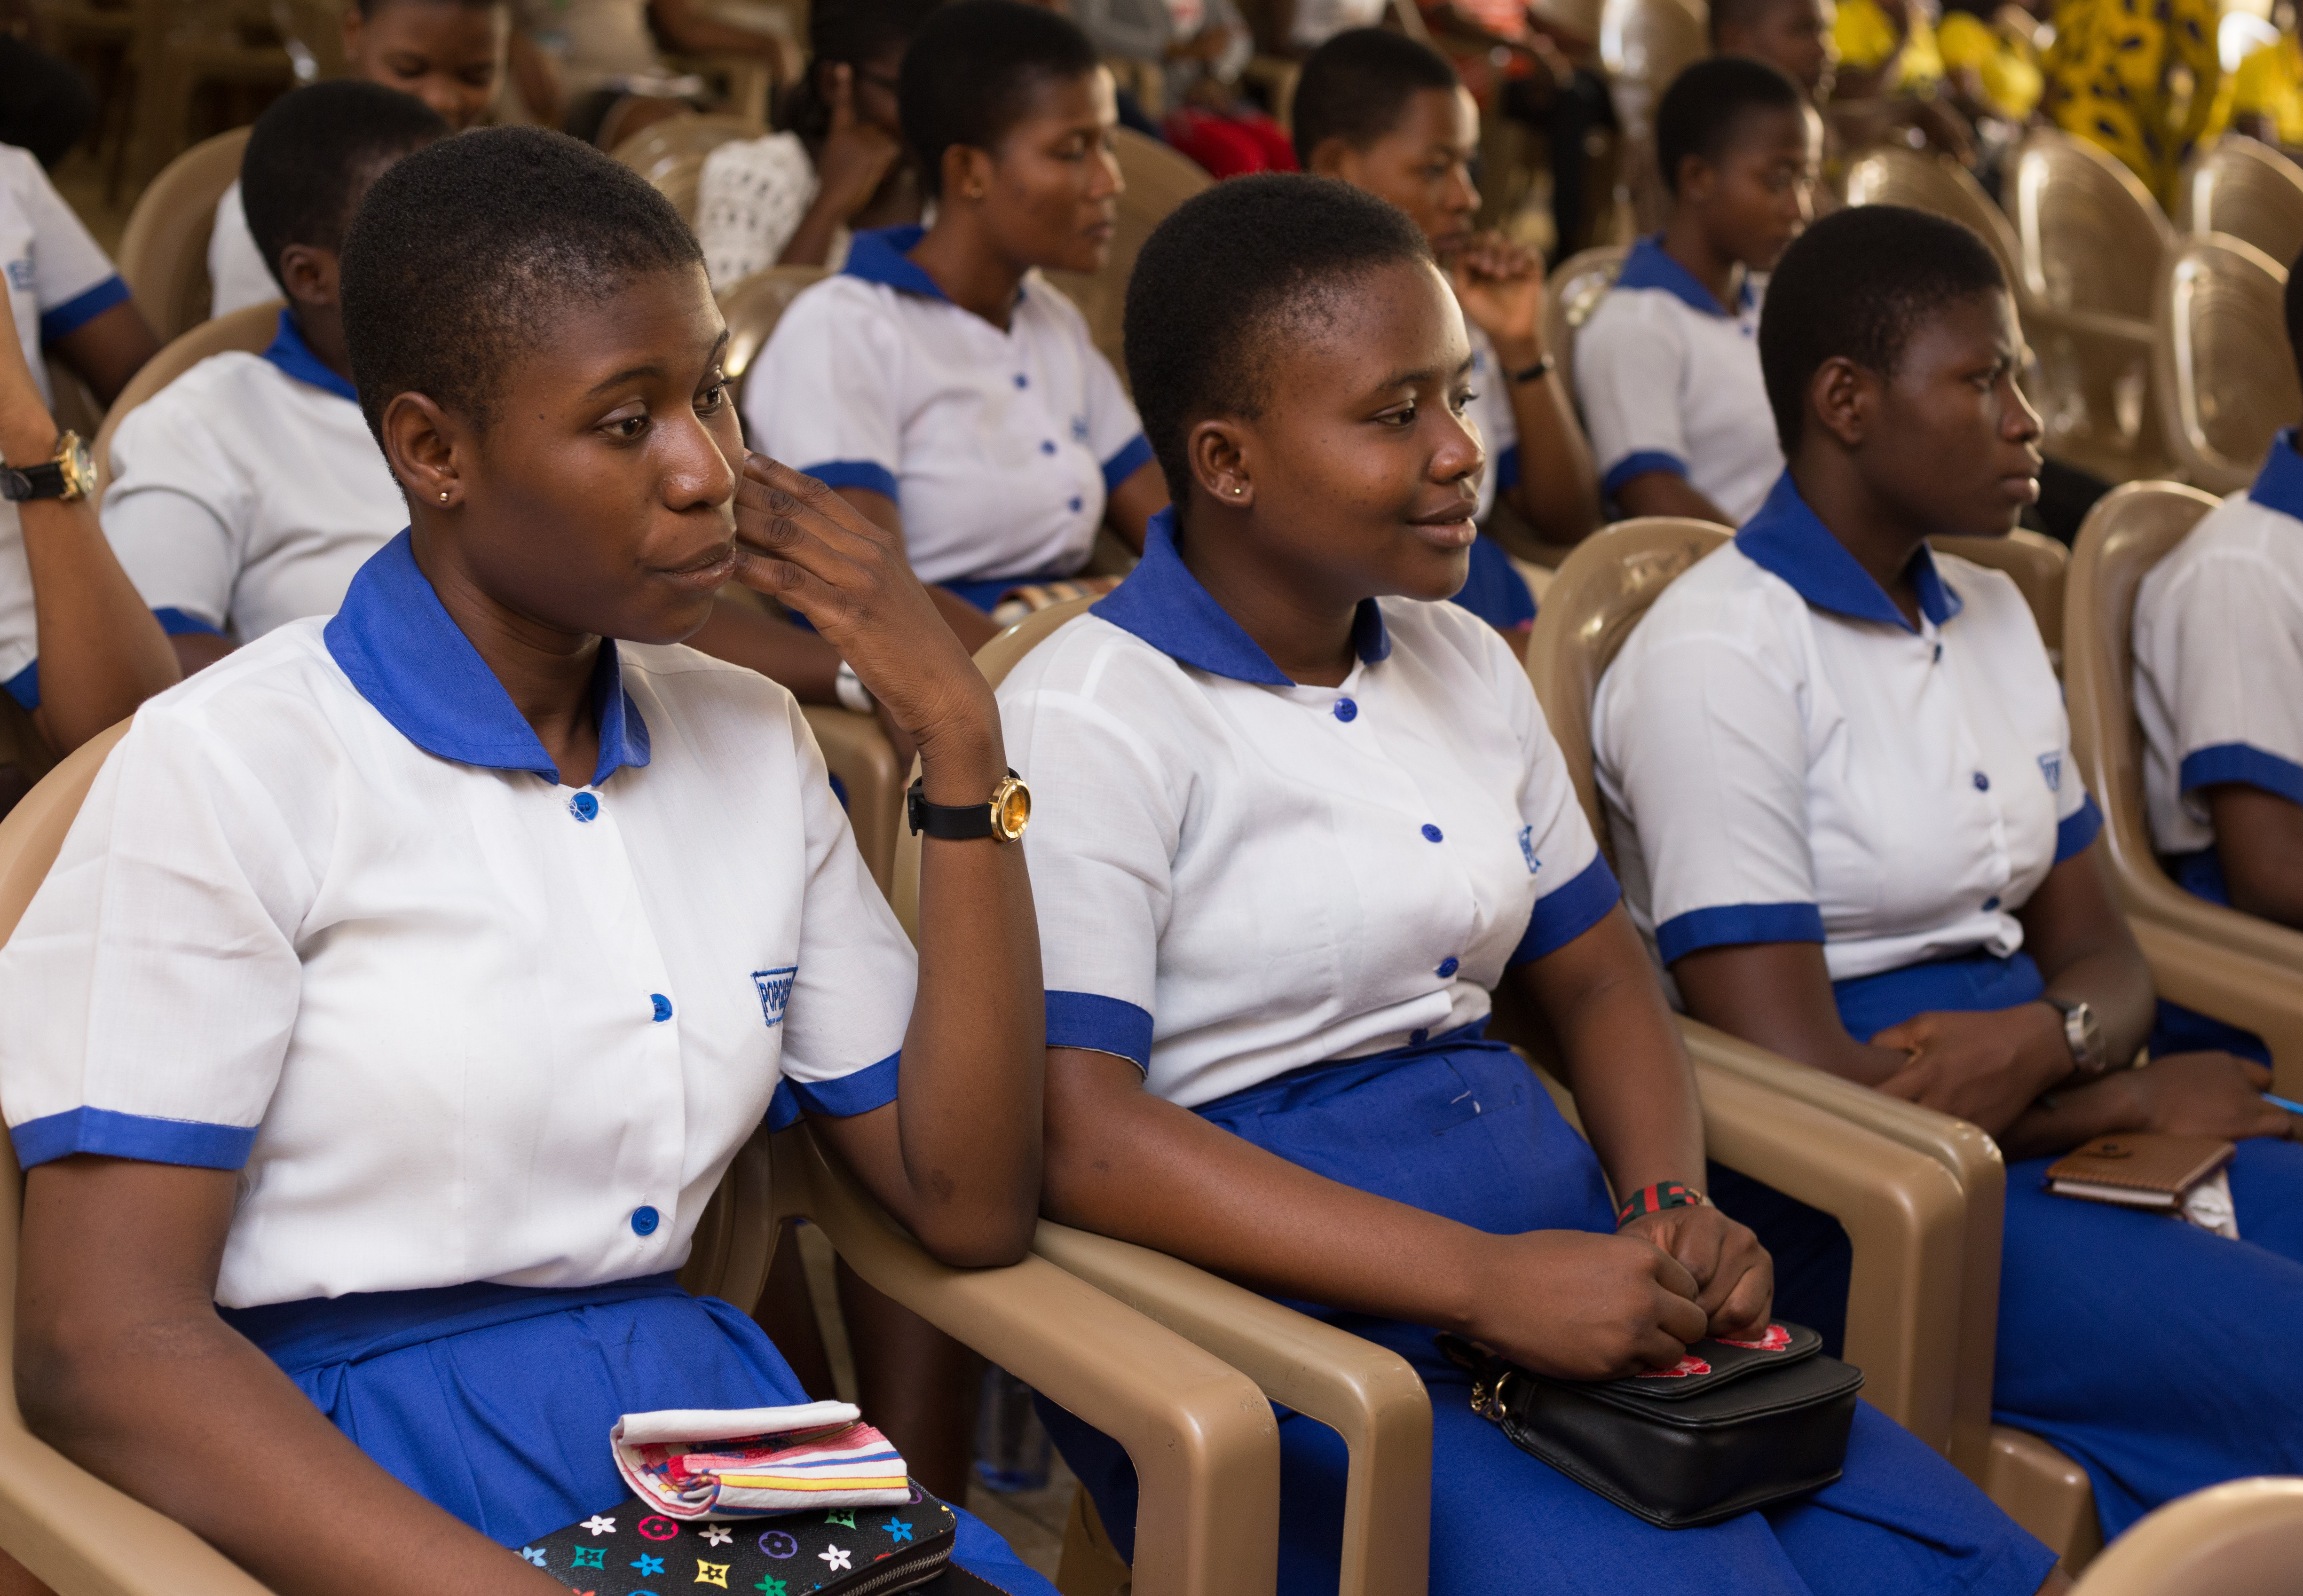 Amoxycillin and Amoxyclav are the Most Used Antibiotics by Female SHS Students in Ghana